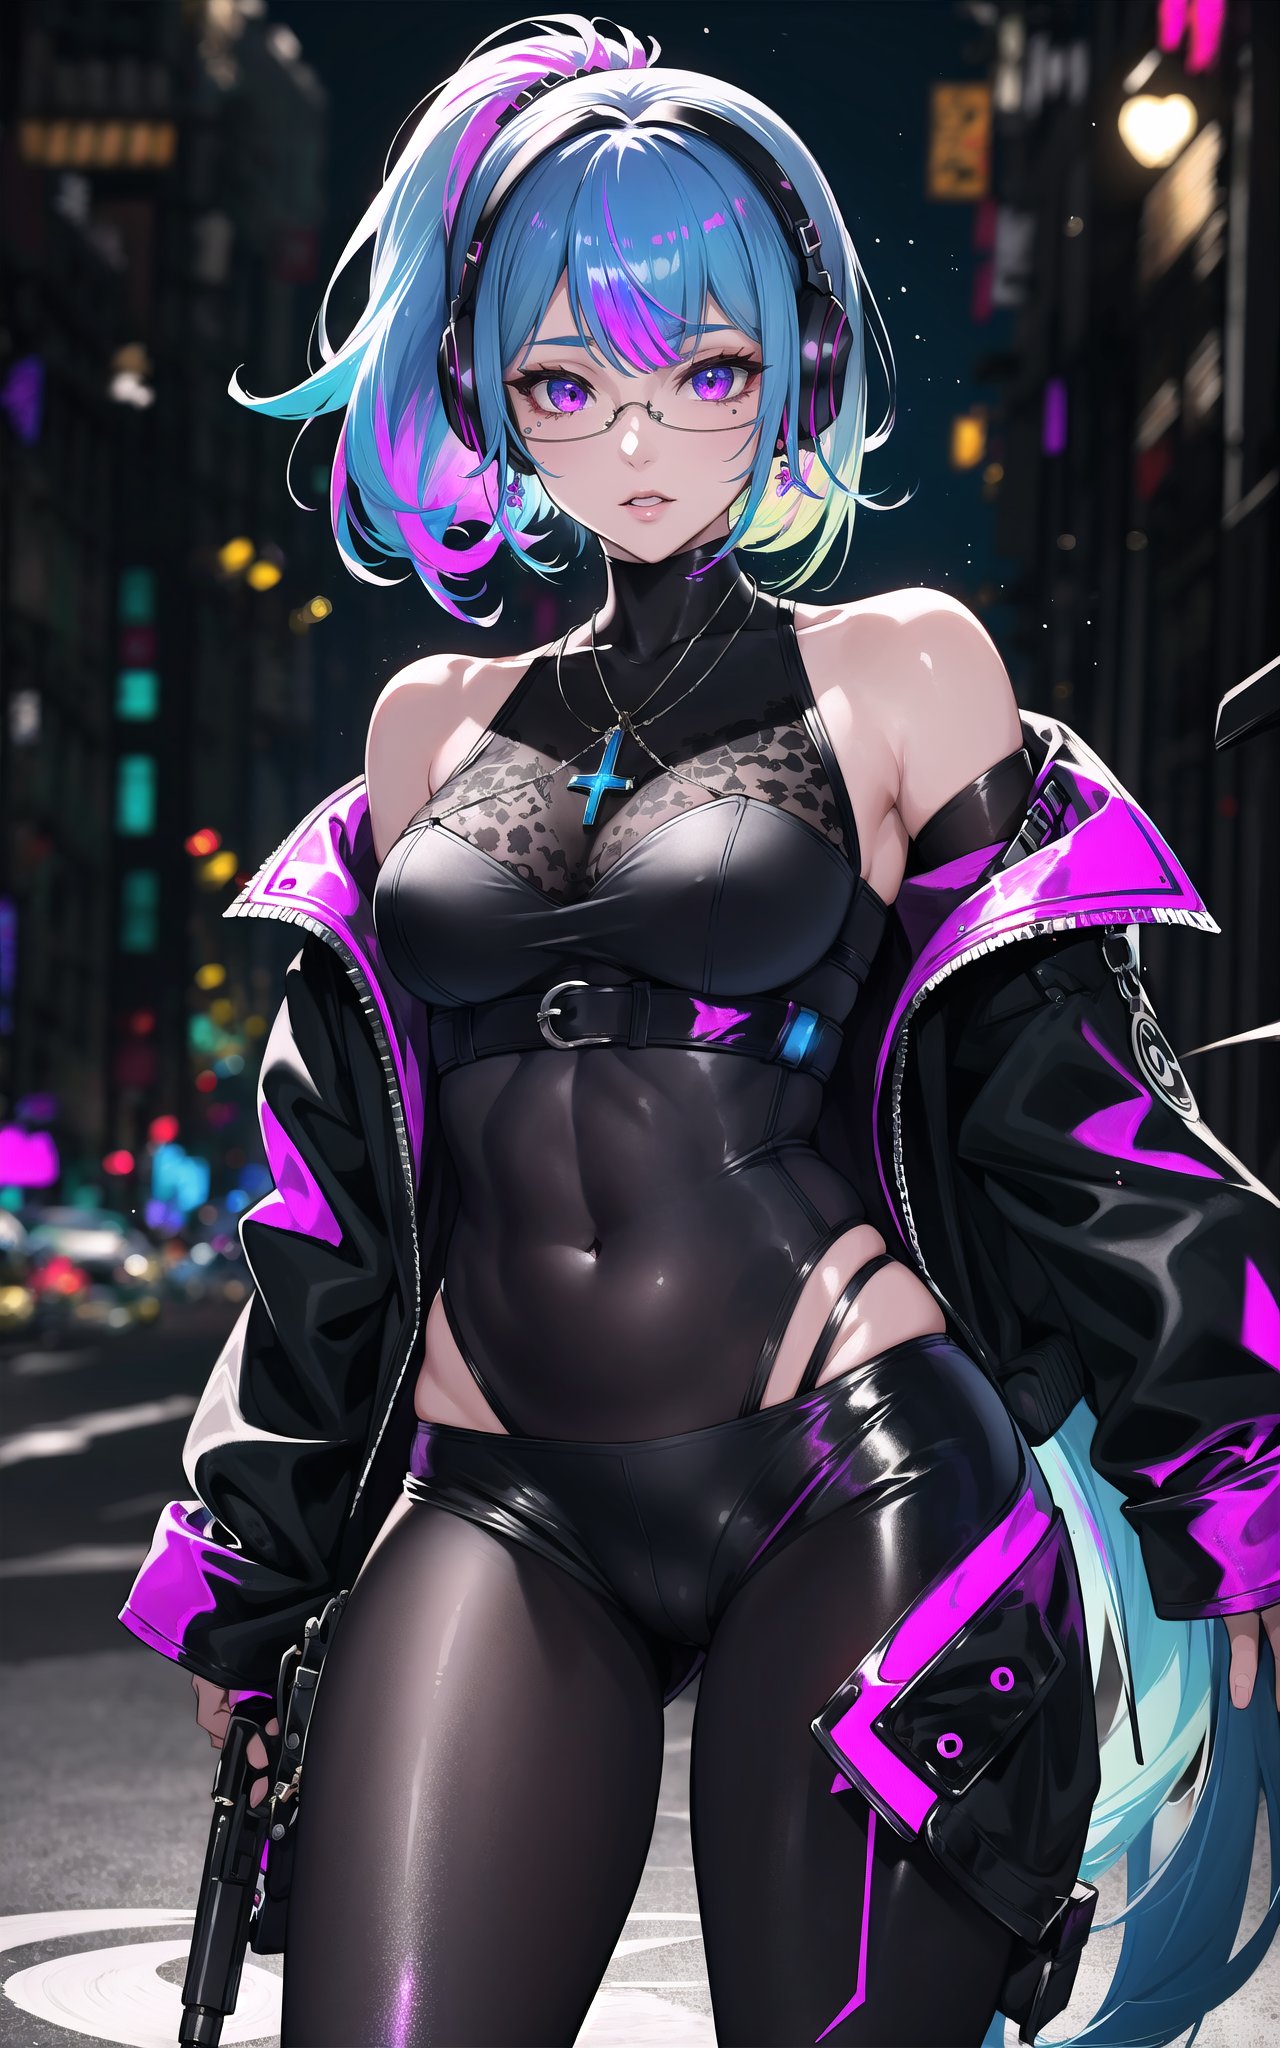 (masterpiece,  best quality:1.4),  top quality,  insaneres,  digital illustration,  (faux Traditional Media),  Manga,  tomboy,  jacket,  off shoulder,  chain,  earrings,  (dynamic pose),  [anime visual],  centered,  (8k resolution),  1girl,  glow lines,  rainbow colors,  cg unity wallpaper official art,  (cowboy shot:1.3),  wind lift,  looking at viewer,  gradient eyes,  necklace,  cropped jacket,  spacesuit,  musical note,  sound waves,  (thick lineart),  outline,  headphones,  techno,  psychadelic,  glass,  transparent,  iridescent,  standing,  contrapposto,  space,  (iridescent:1.4),  (shiny:1.3),  galaxy print,  cybernetic parts,  (intricate details),  extemely detailed,  solo,  floating,  surreal,  fantasy,  (neon sign),  city,  otherworldly,  (gradients),  blending,  dynamic posture,  transparent,  retro artstyle,  (ultra-detailed),  (swept bangs,  low ponytail:1.2),  eye reflection,  glowing eyes,  (multicolored theme:1.2),  science fiction,  (space art:0.2),  (blurry background,  deep depth of field:1.5),  (sharp focus),  volumetric lighting,  rim lighting,  (outline),  holding gun,  energy, ff14bg, 1 girl, <lora:EMS-48308-EMS:0.600000>, , <lora:EMS-7851-EMS:0.200000>, , <lora:EMS-13102-EMS:0.400000>